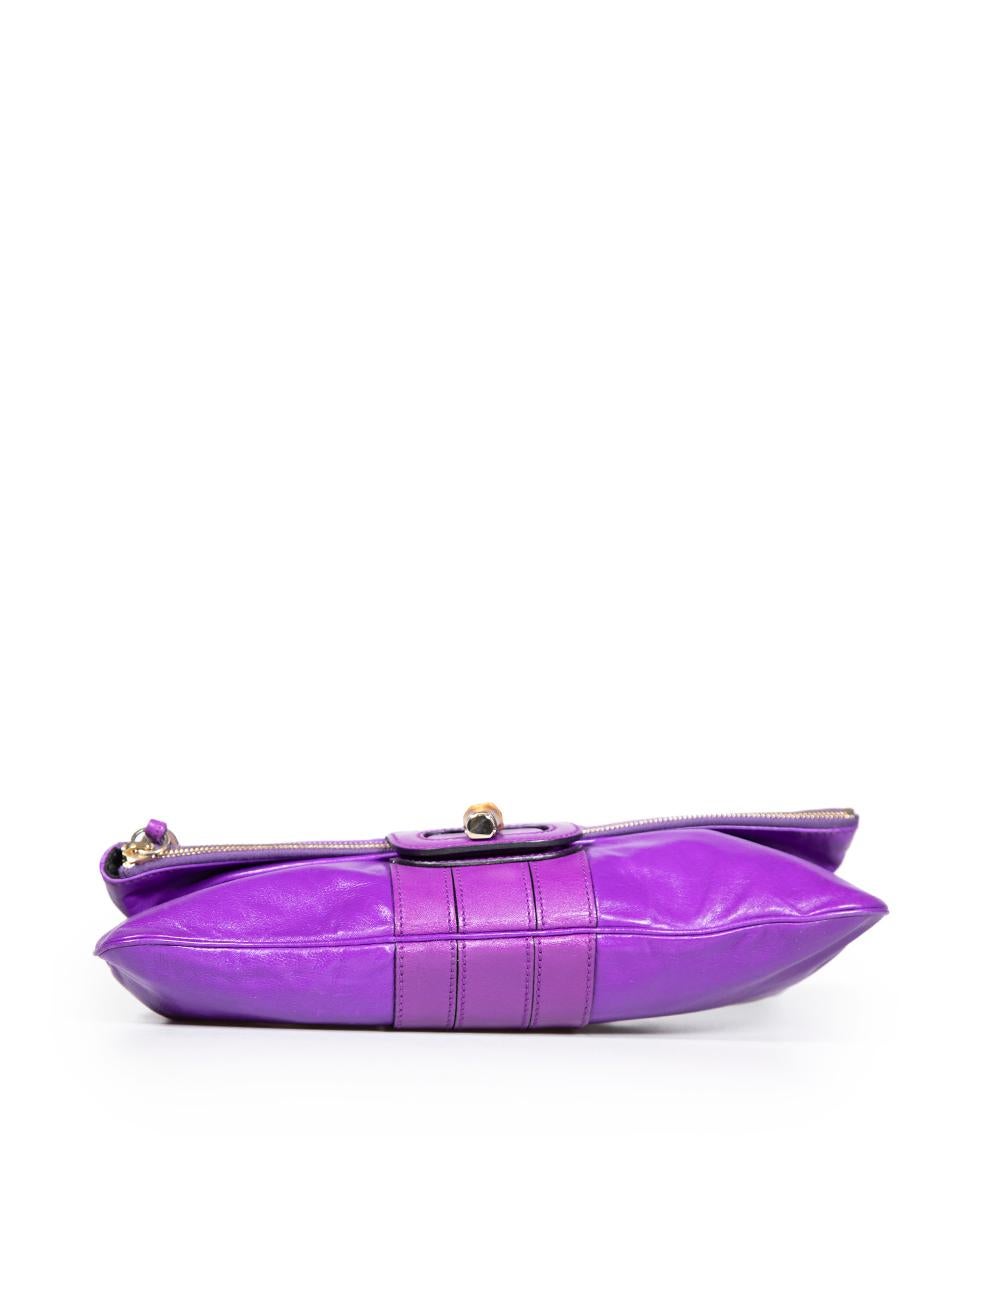 Women's Gucci Purple Leather Bamboo Turnlock Lucy Clutch For Sale